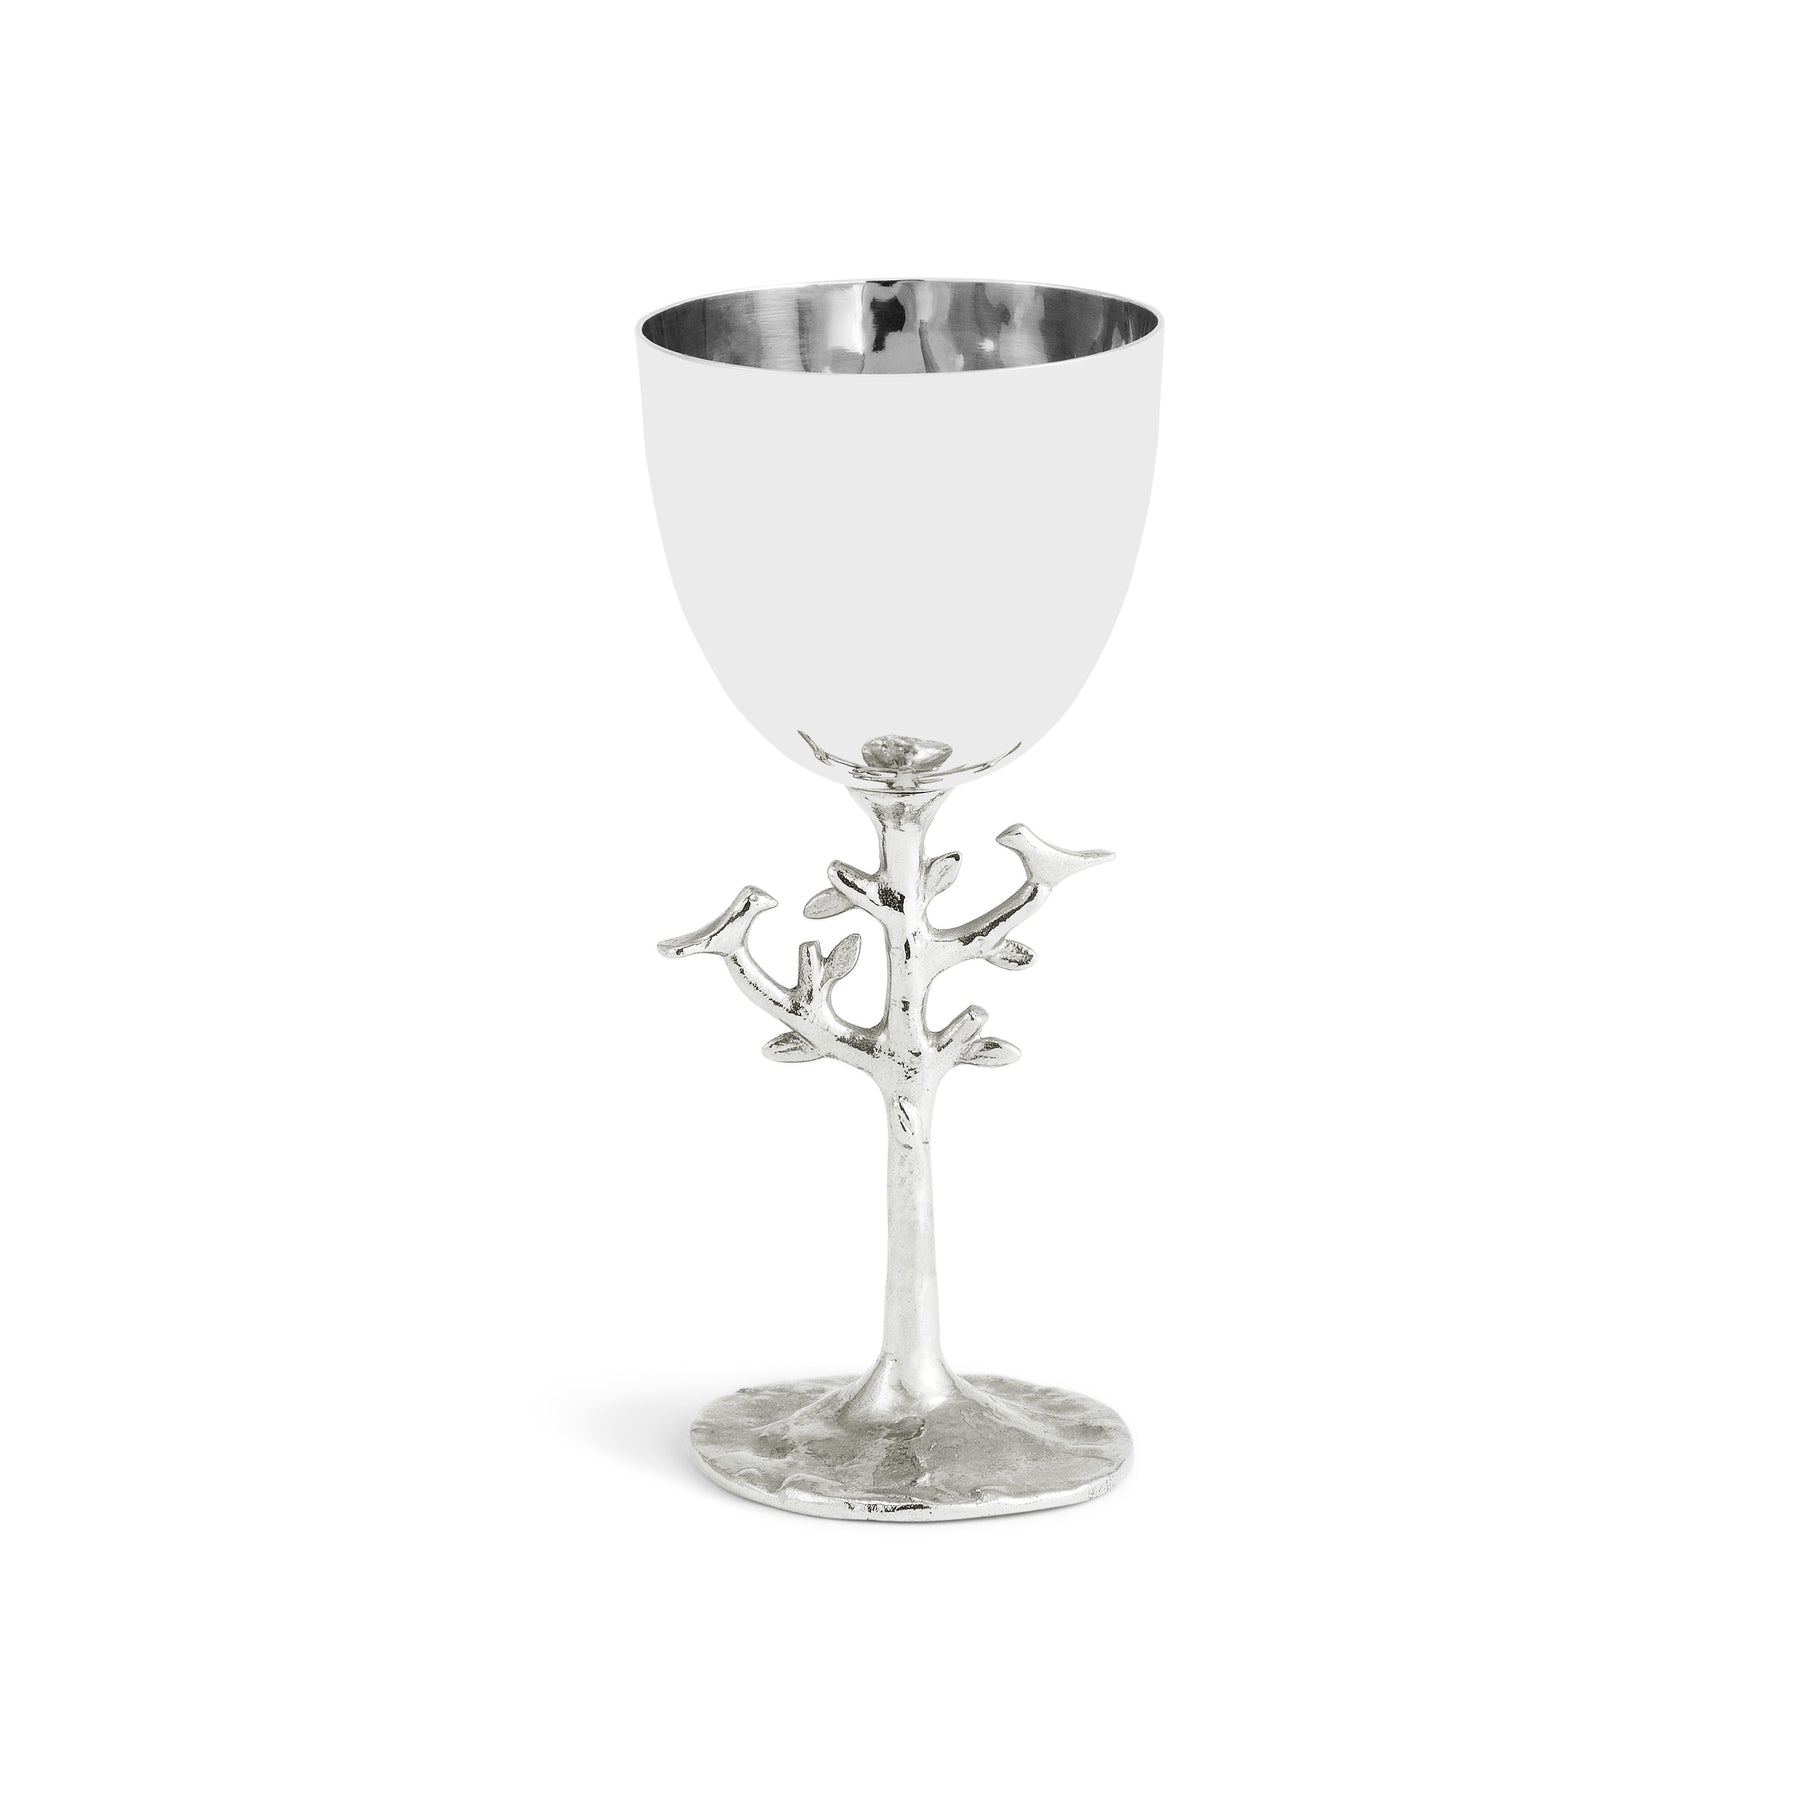 Kiddush Cup. Tree of Life Design, Polished Stainless Steel